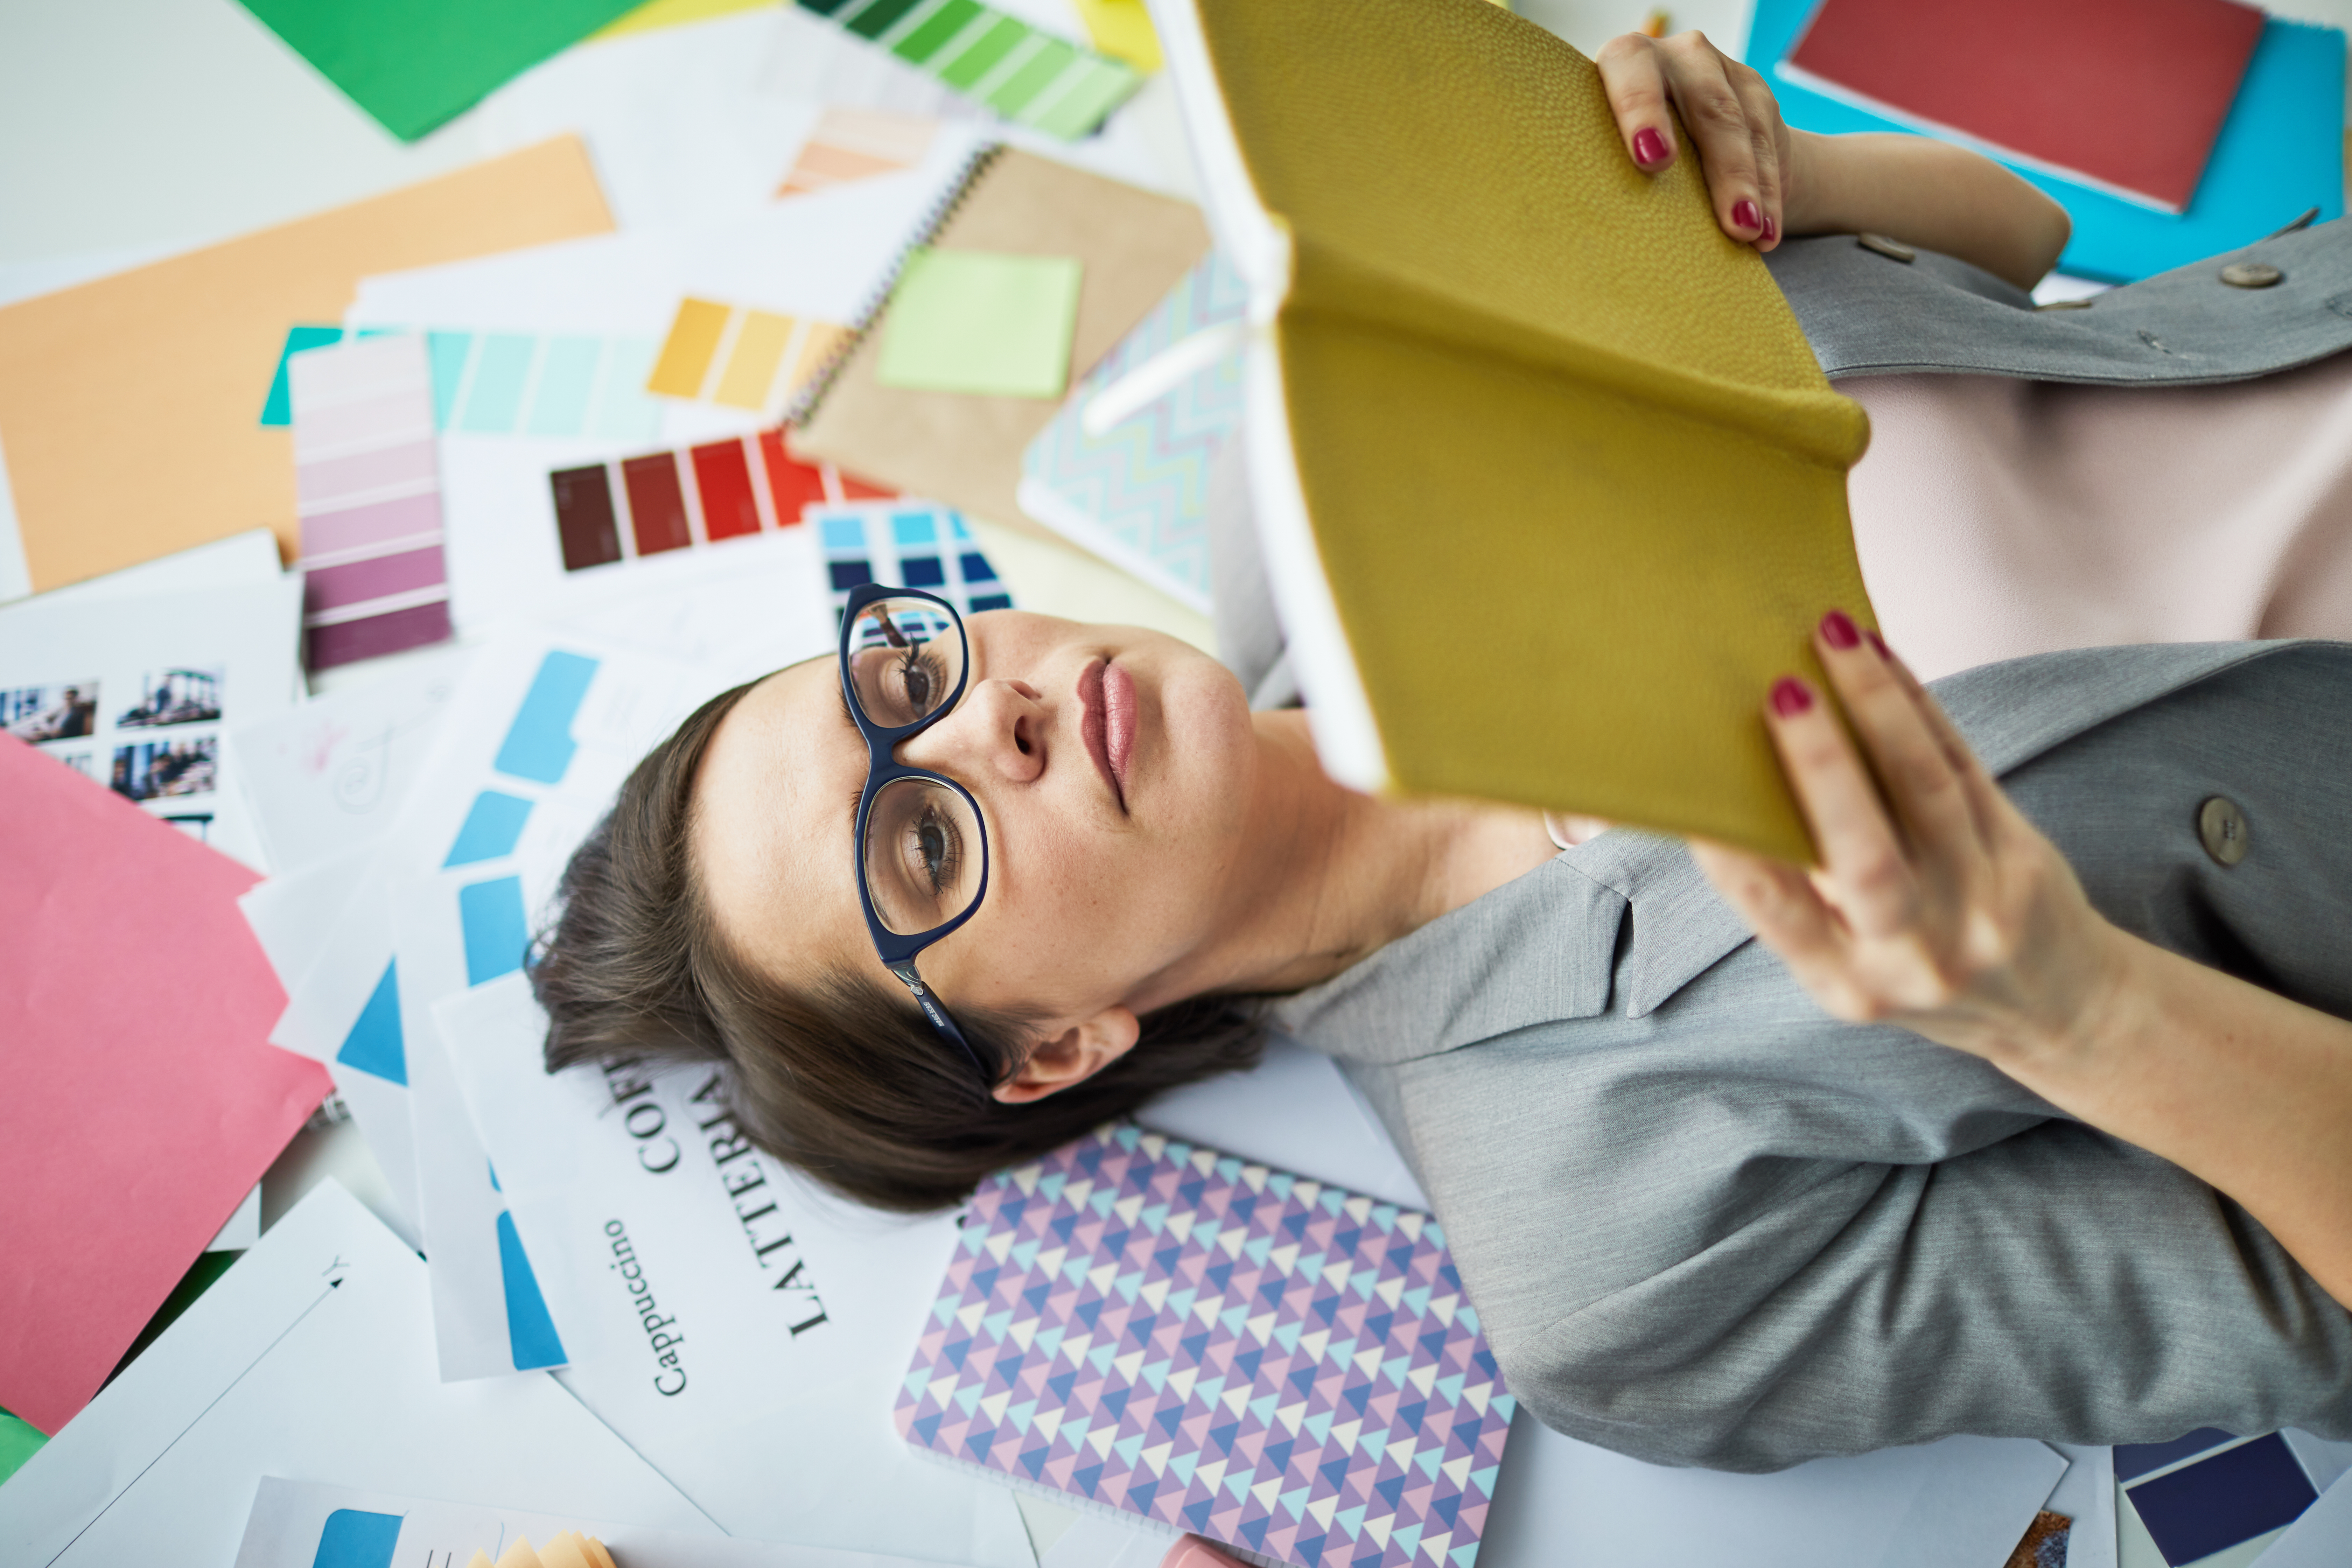 Top view portrait of contemporary businesswoman wearing glasses  reading book while  lying over  art and design supplies, copy space